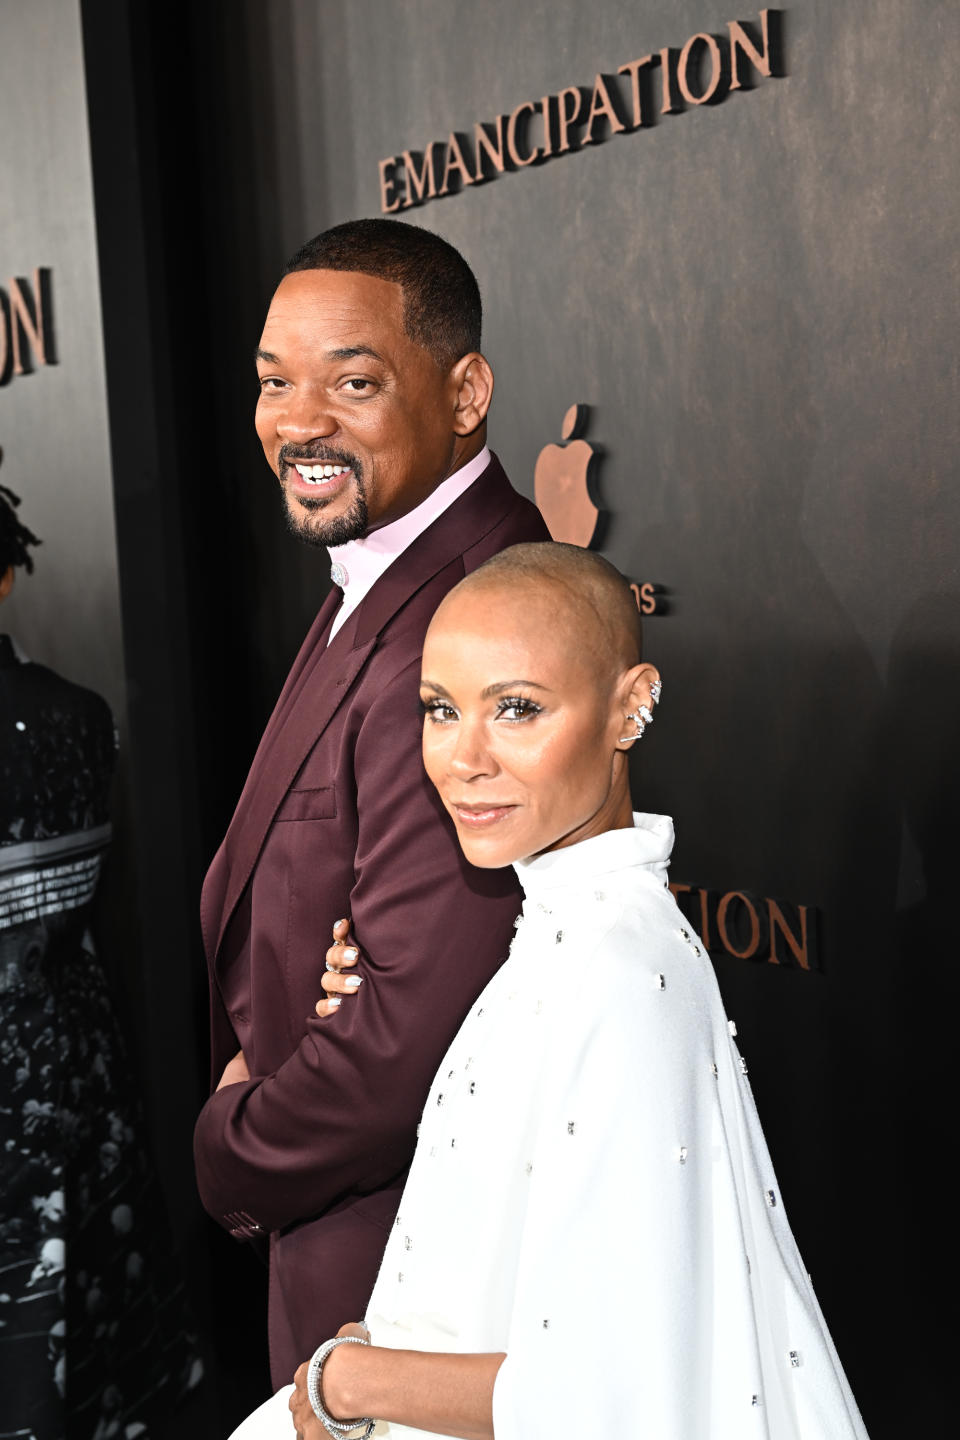 Will Smith and Jada Pinkett Smith at the premiere of Apple Original Films' "Emancipation" held at Regency Village Theatre on November 30, 2022 in Los Angeles, California. (Photo by Michael Buckner/Variety via Getty Images)